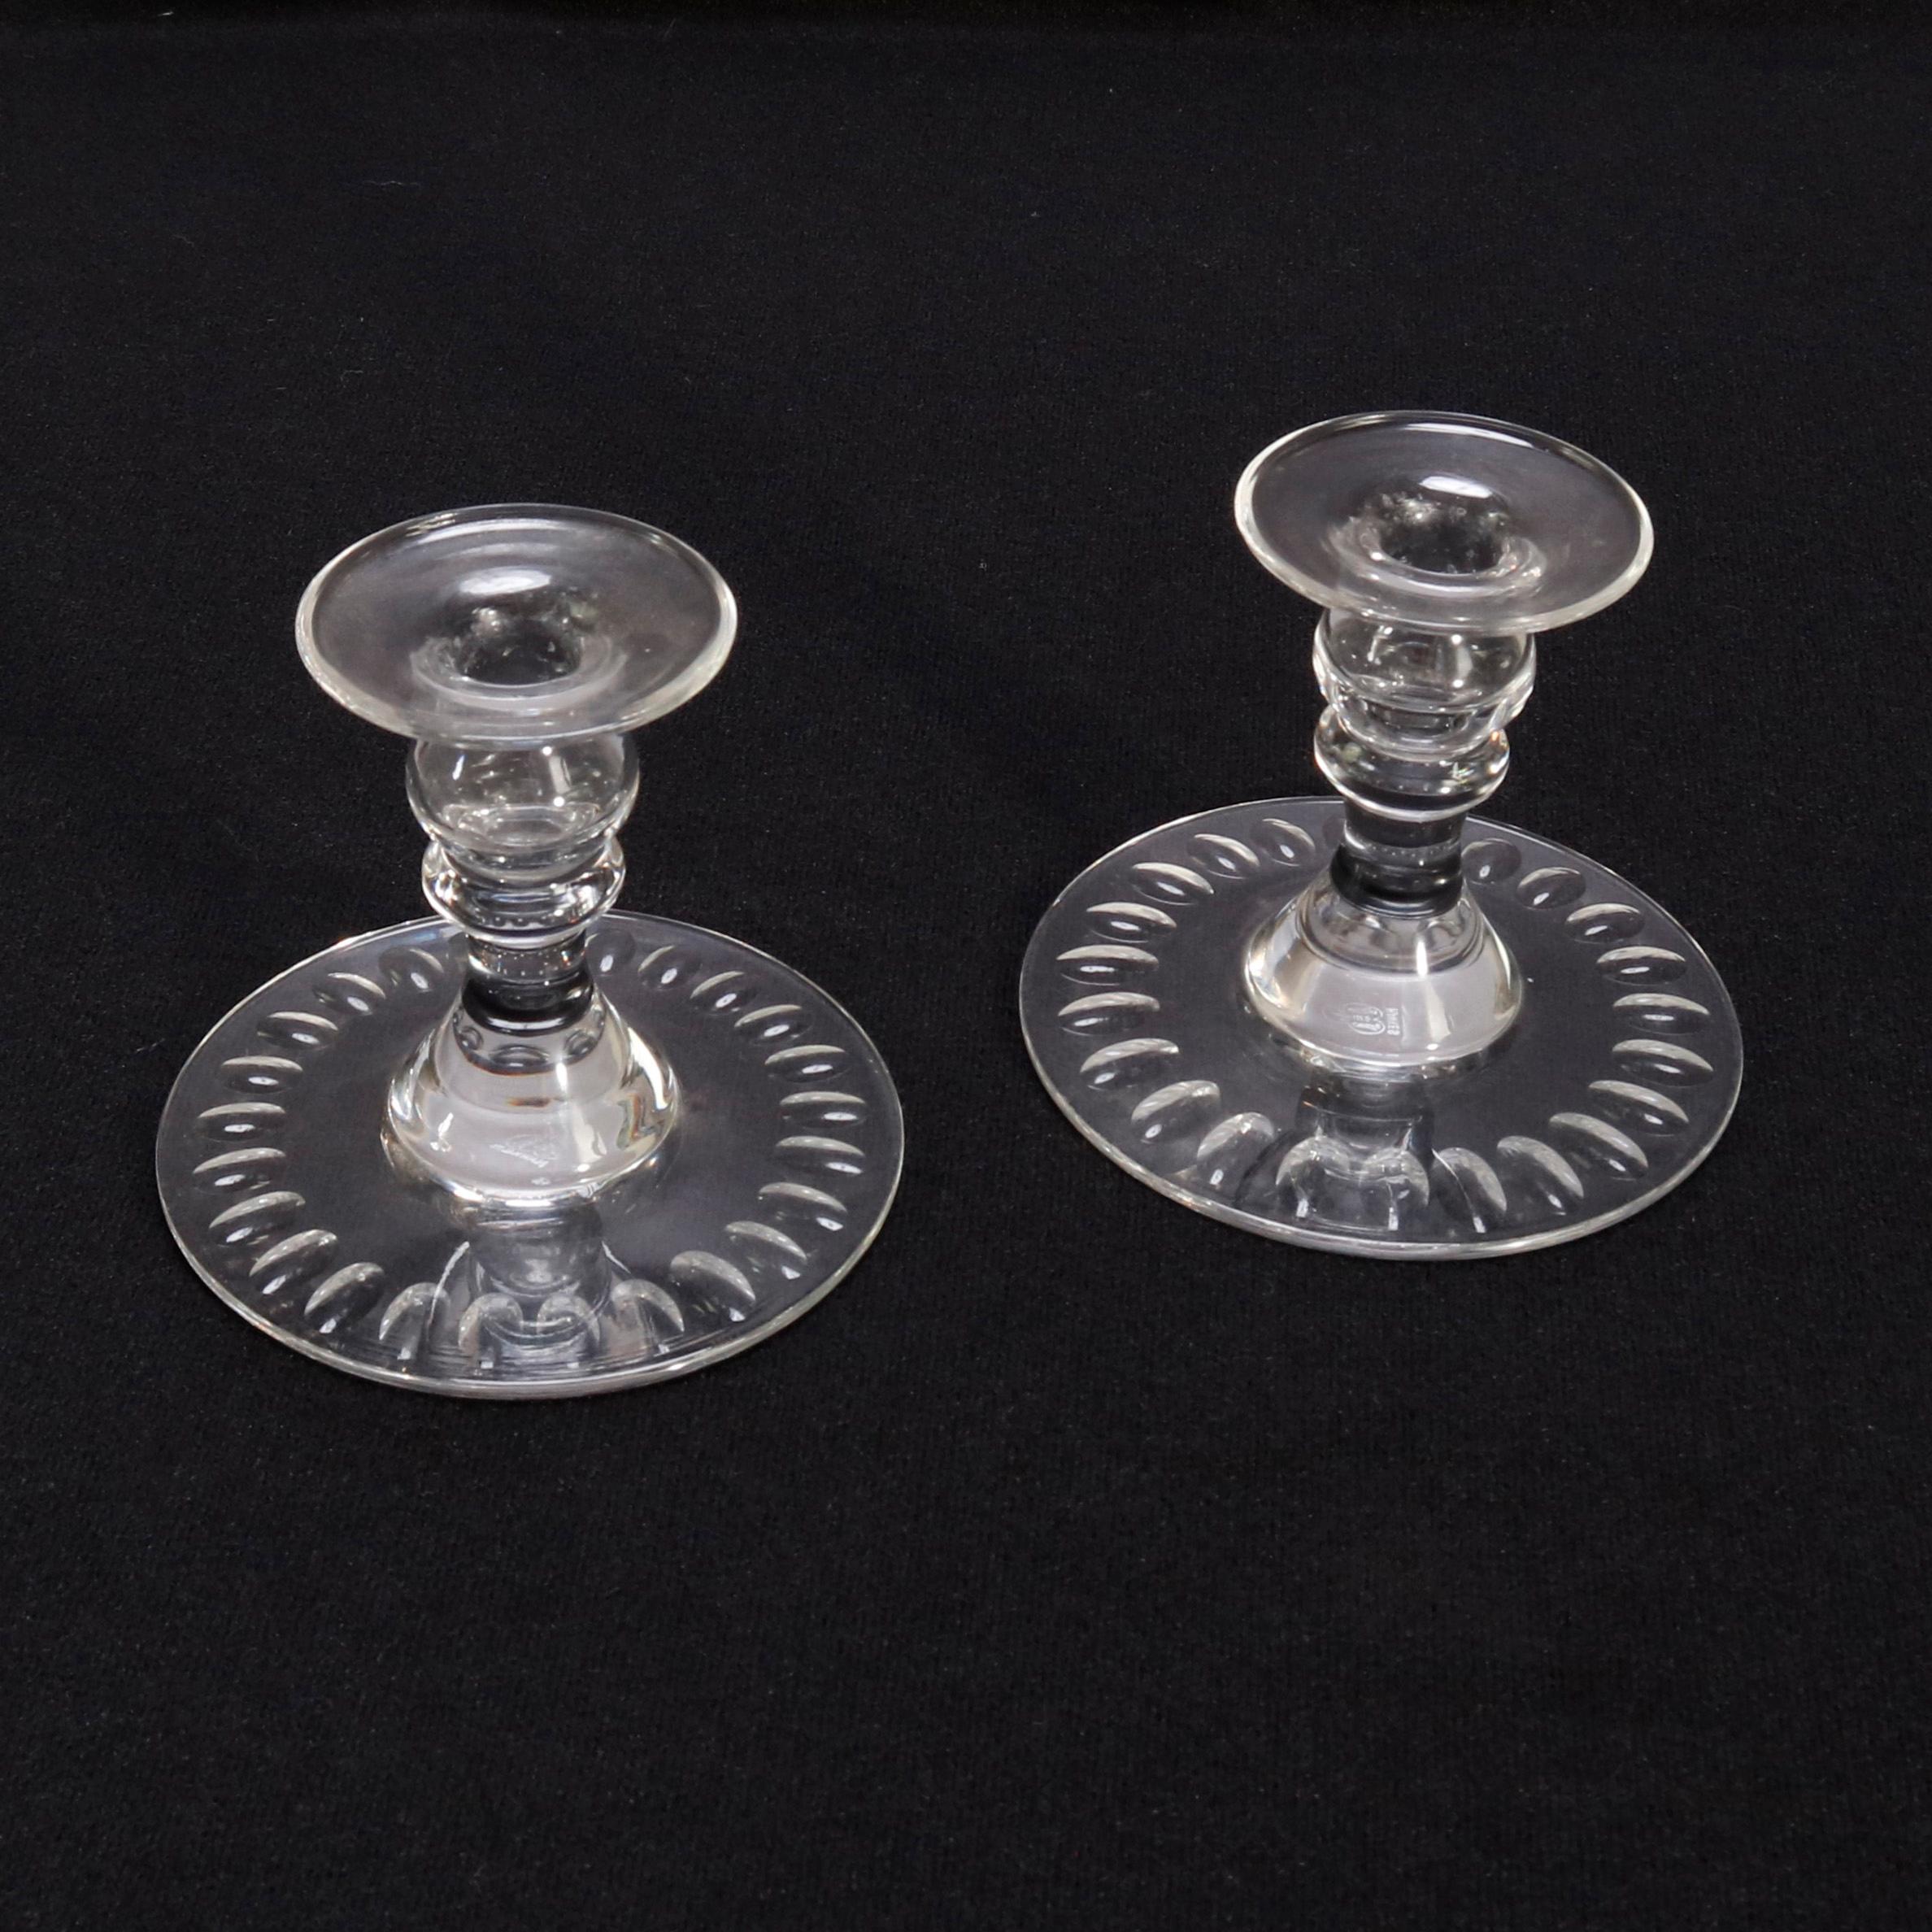 A pair of cut crystal candlesticks by Hawkes offers column form with base having repeating thumb print design, signed on base, 20th century

Measures: 4.25